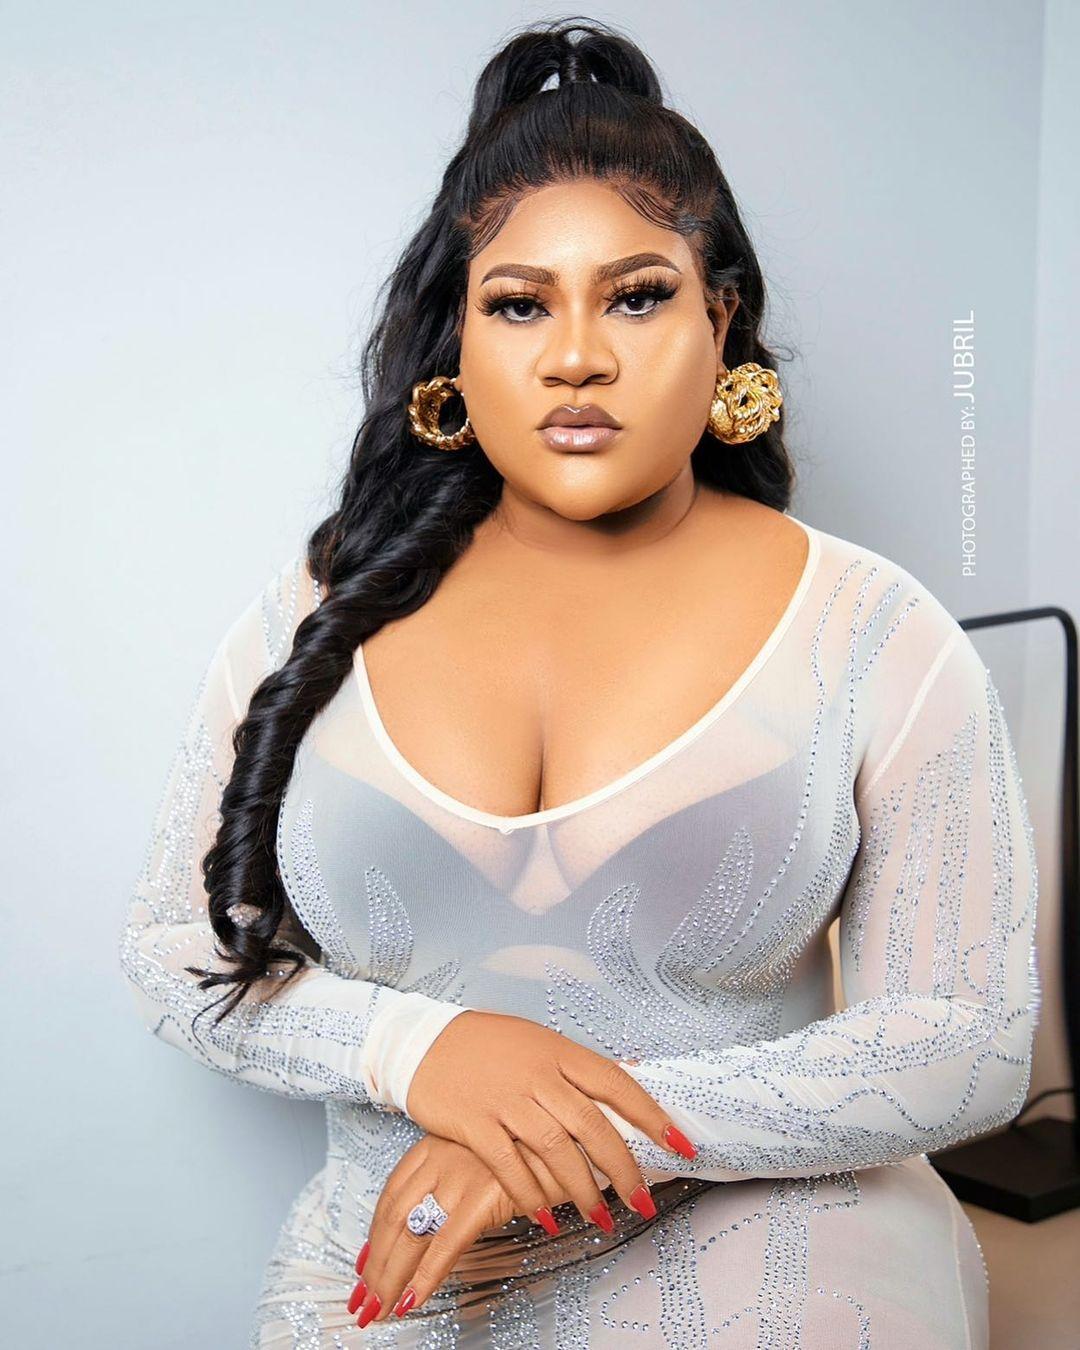 "Speak up, believe in yourself" - Nkechi Blessing’s politician boyfriend reacts to her suspension from Nollywood